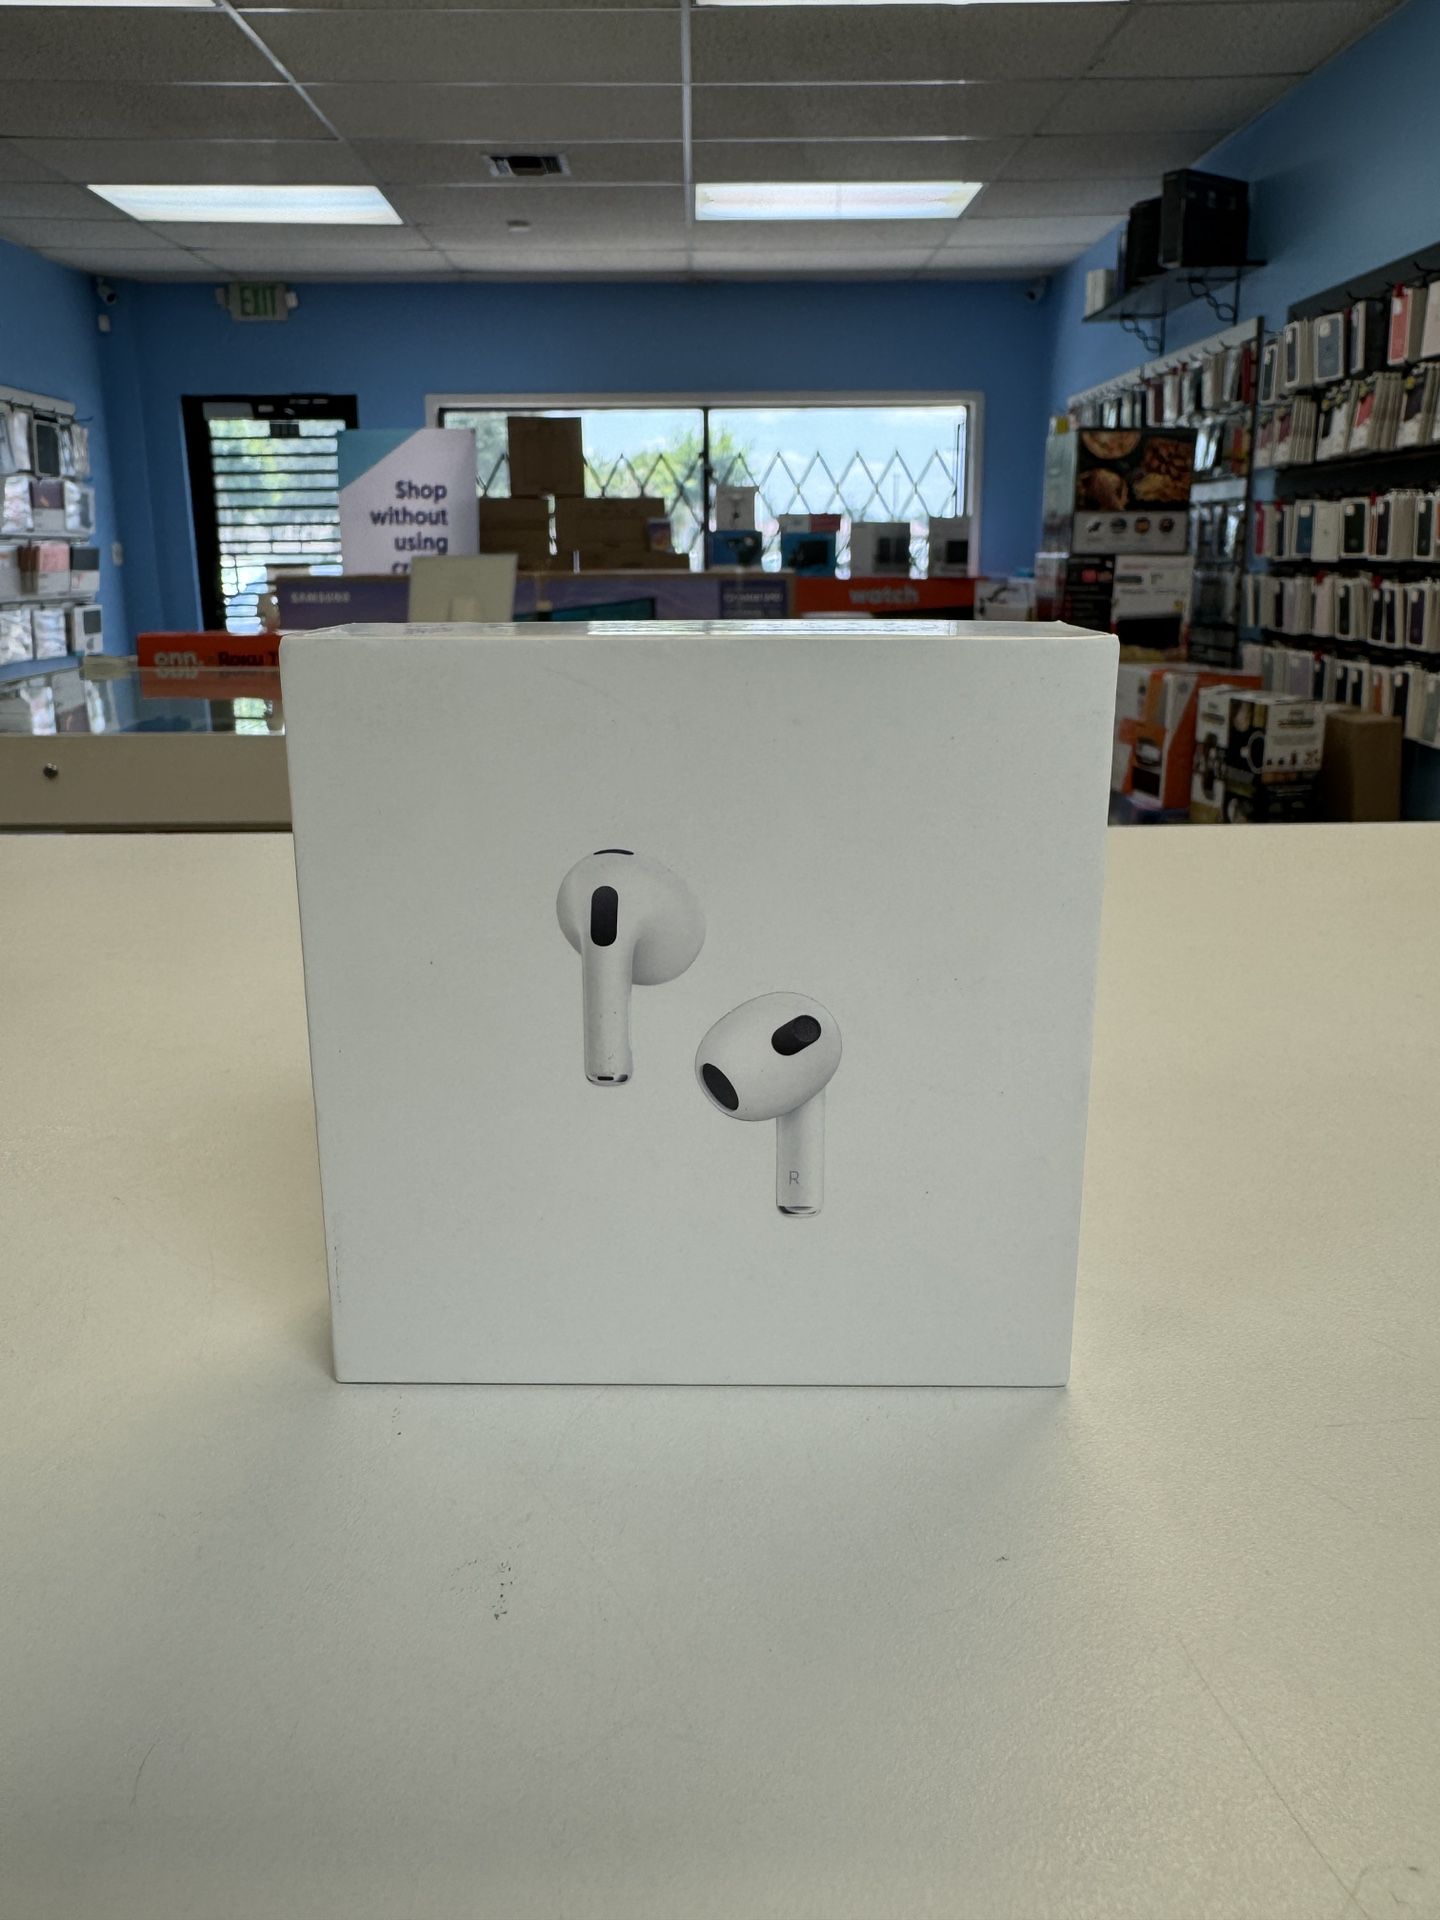 AirPods Third Generation Apple Original New with Apple care till December